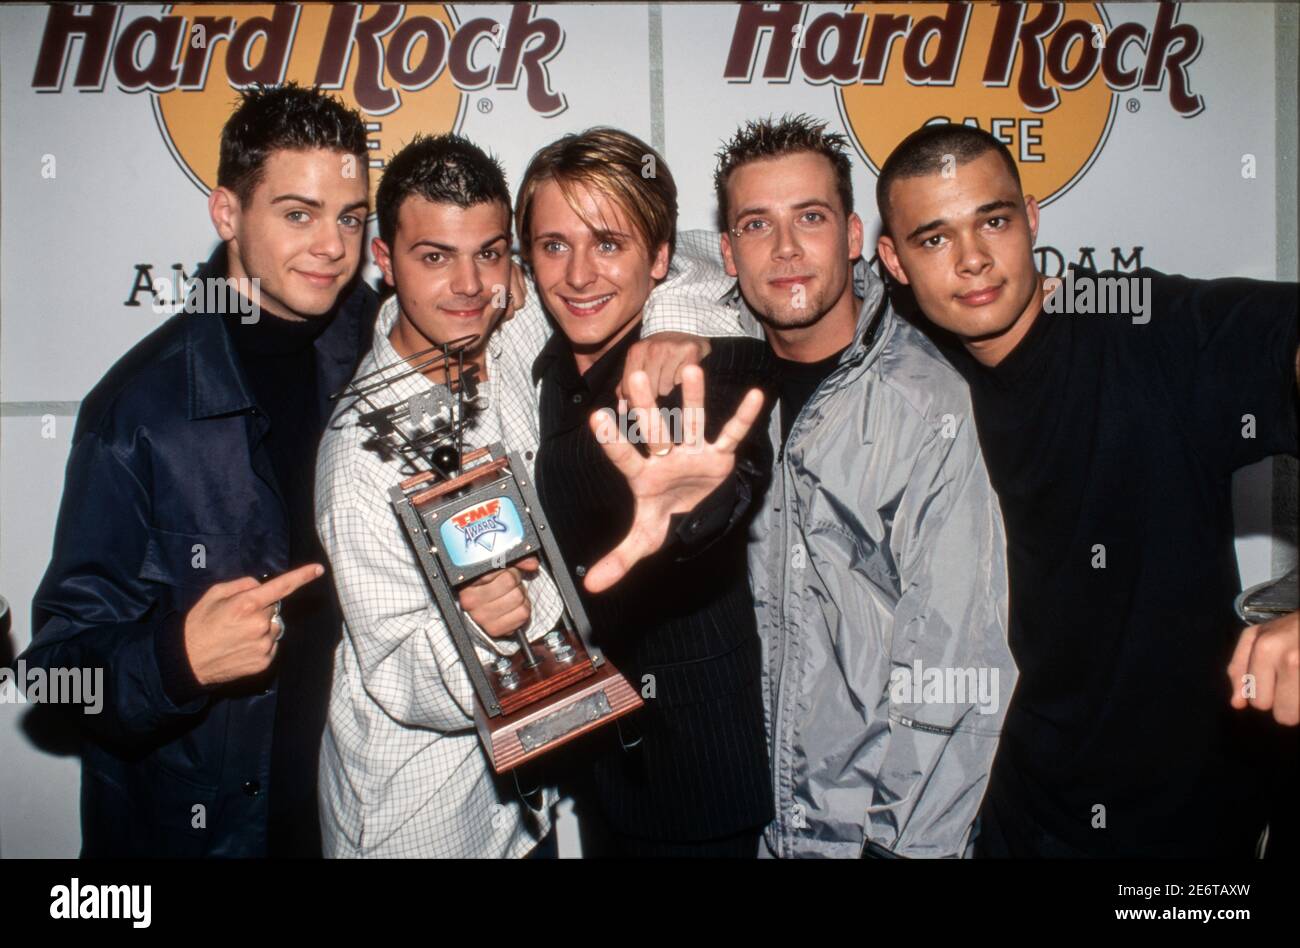 ROTTERDAM, THE NETHERLANDS, OCT 30, 1999: Boyband Five wins the TMF award in the Netherlands for most popular popgroup. Stock Photo